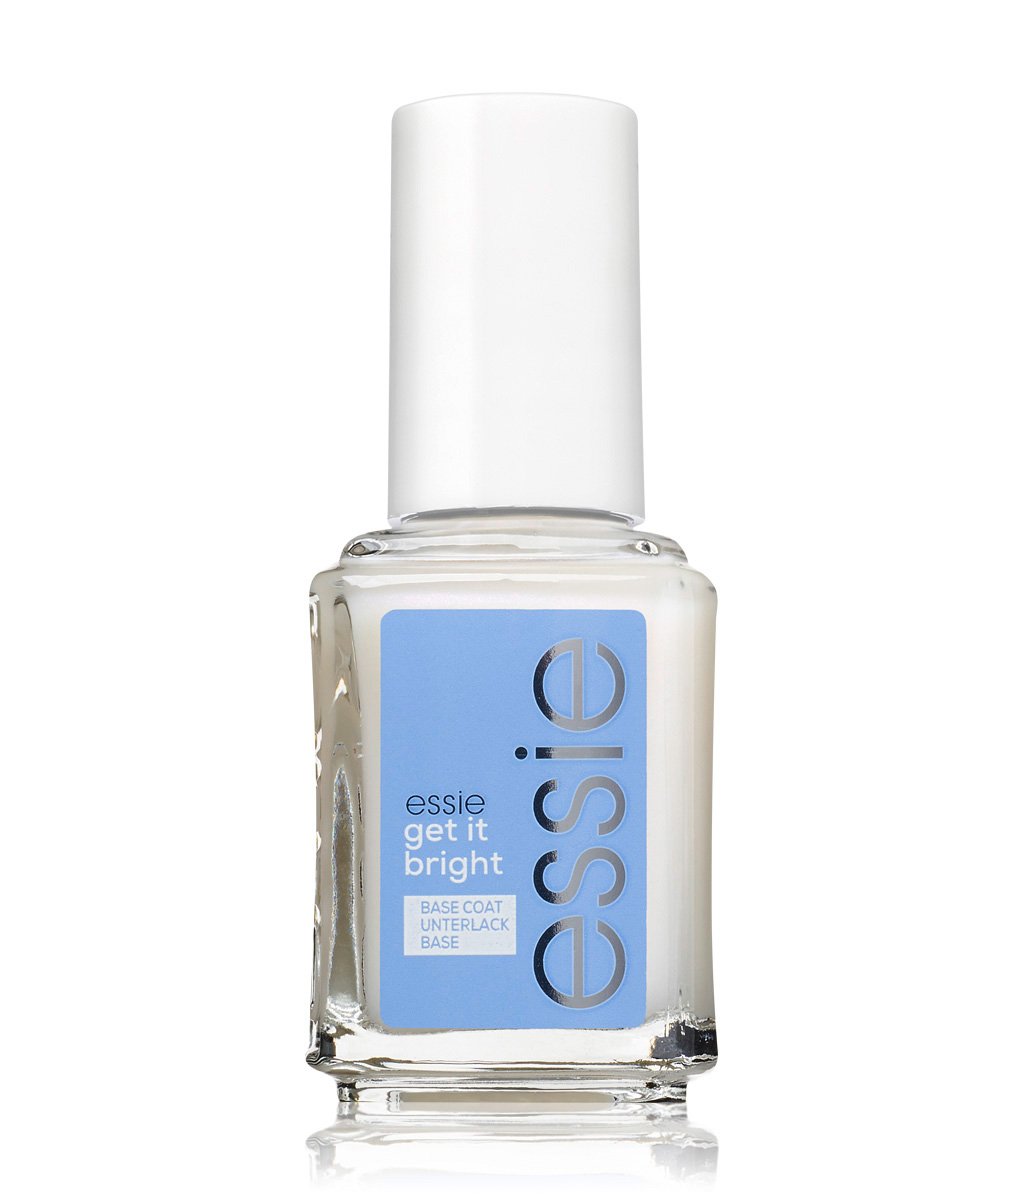 Shop The Latest Essie Base Coat Get It Bright Nail Care exclusive at